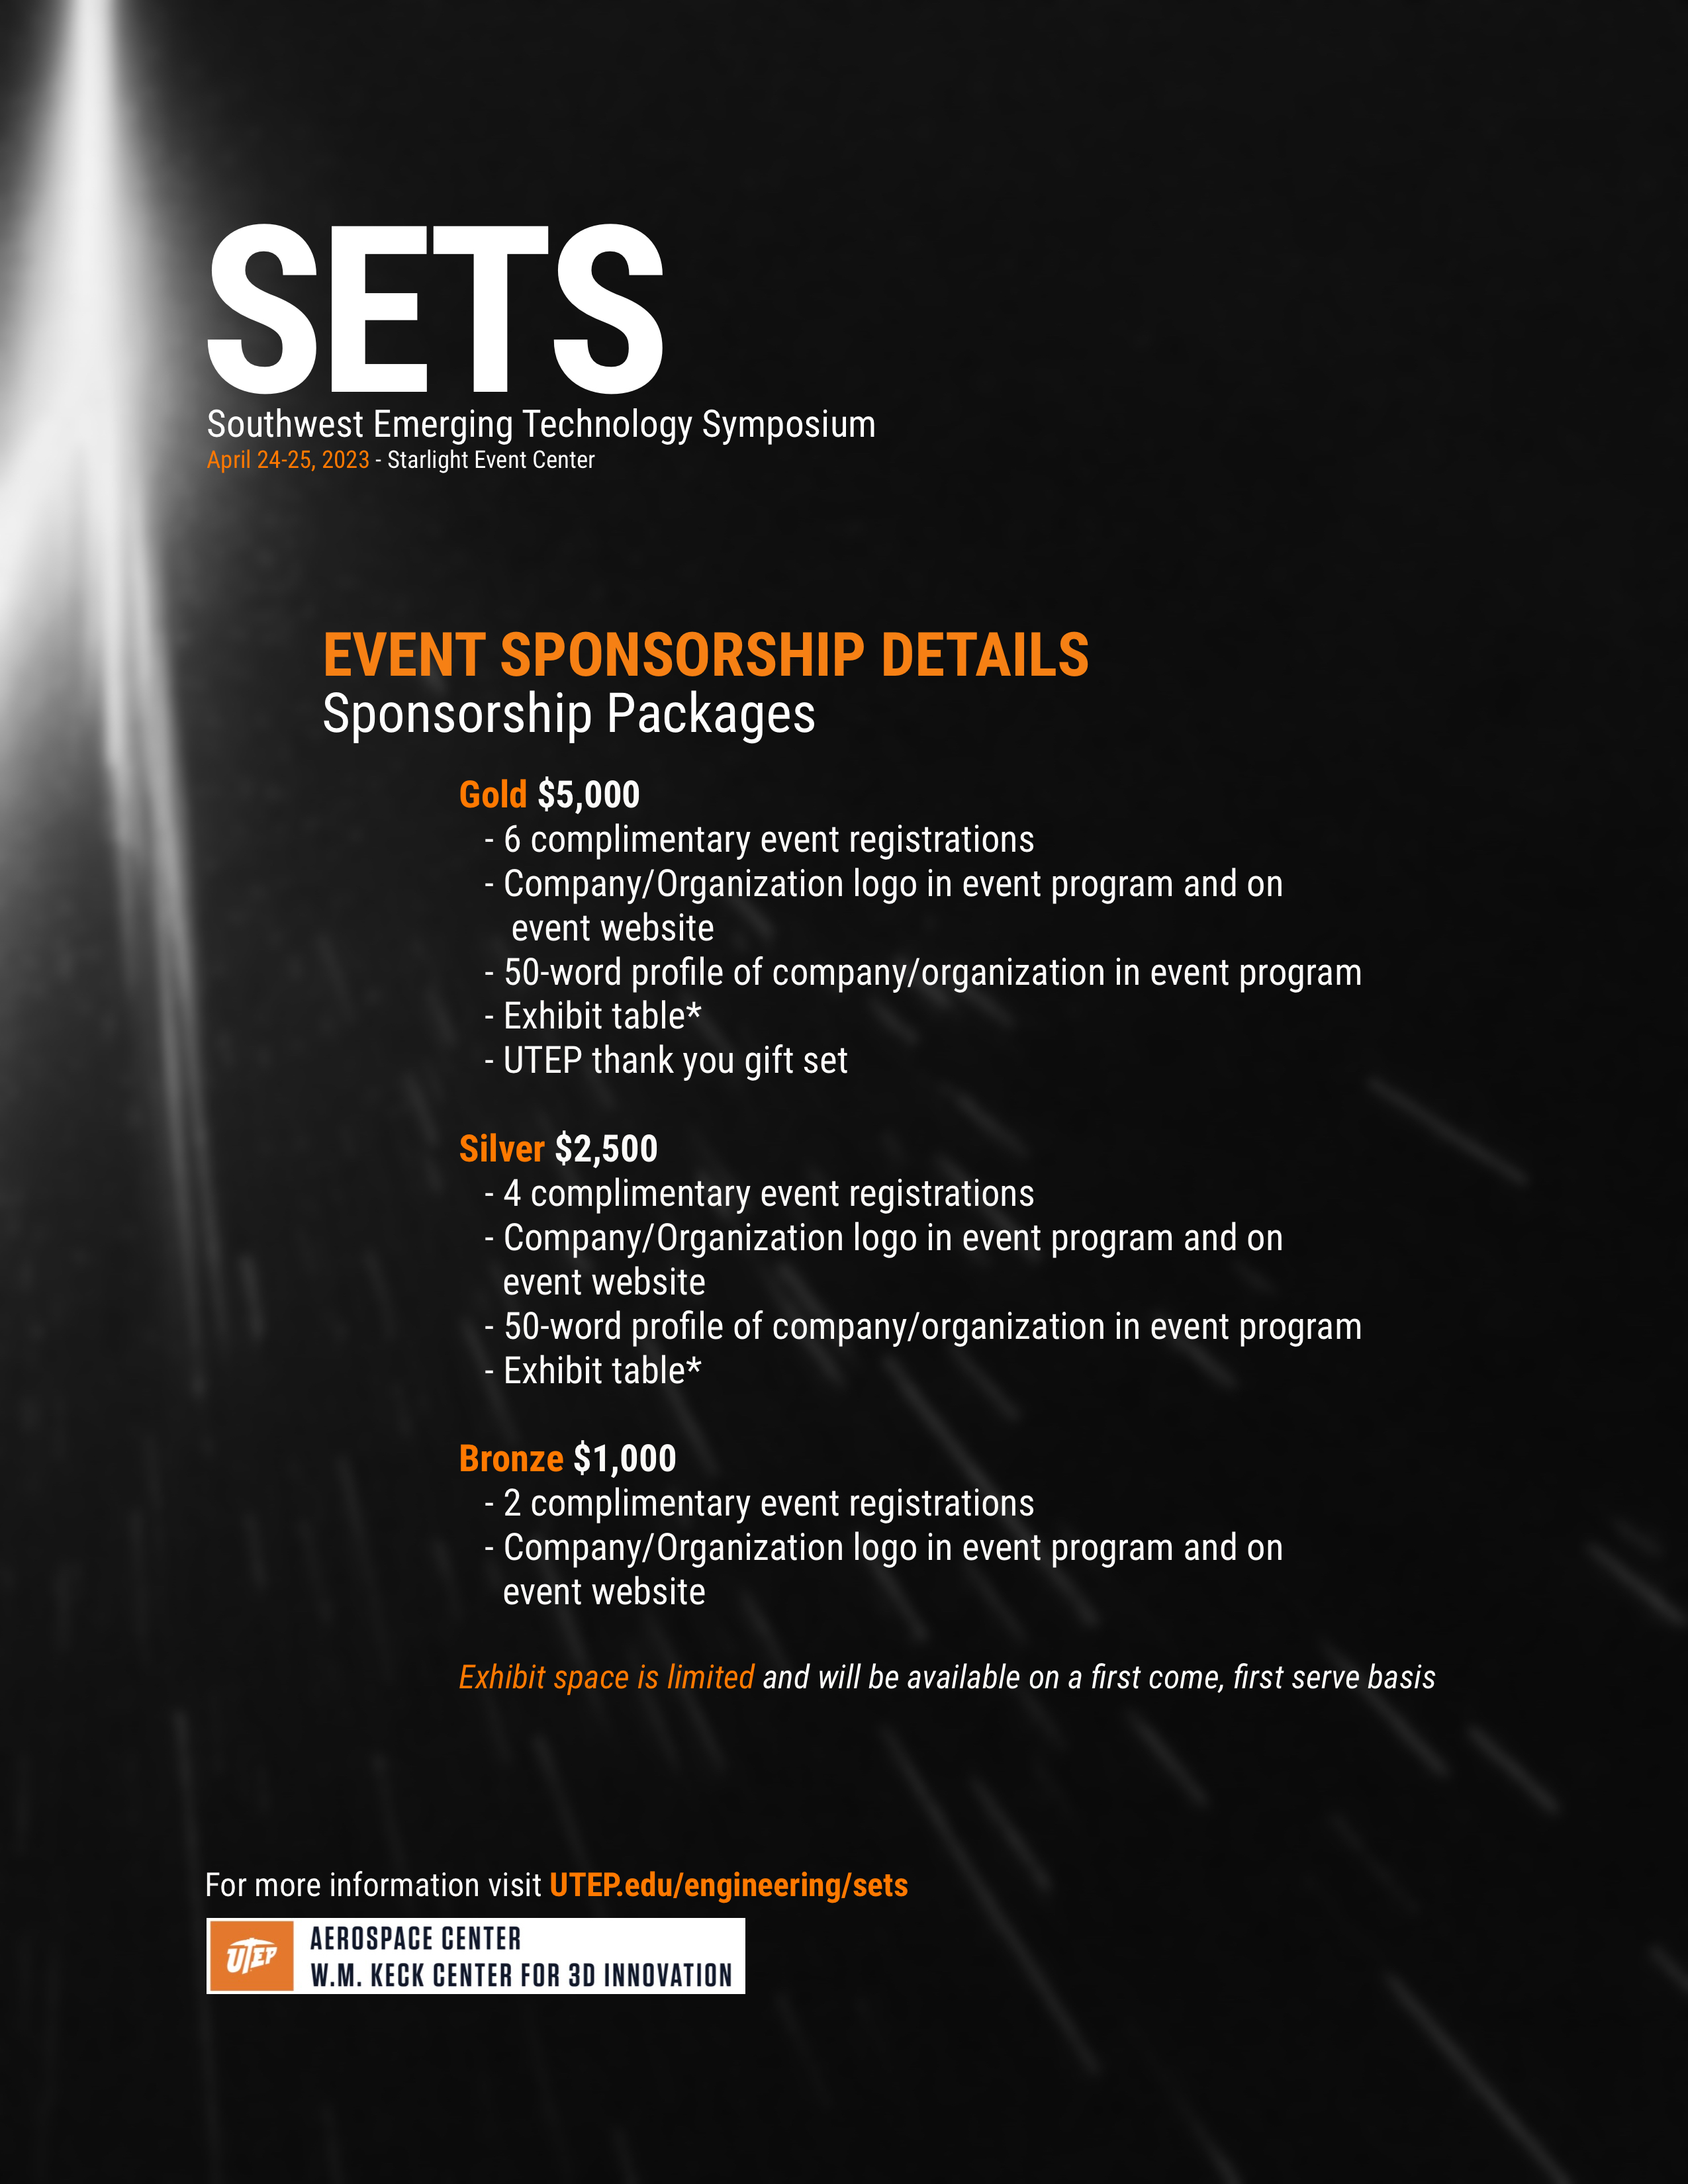 Contact csetr@utep.edu for more information about sponsorship.